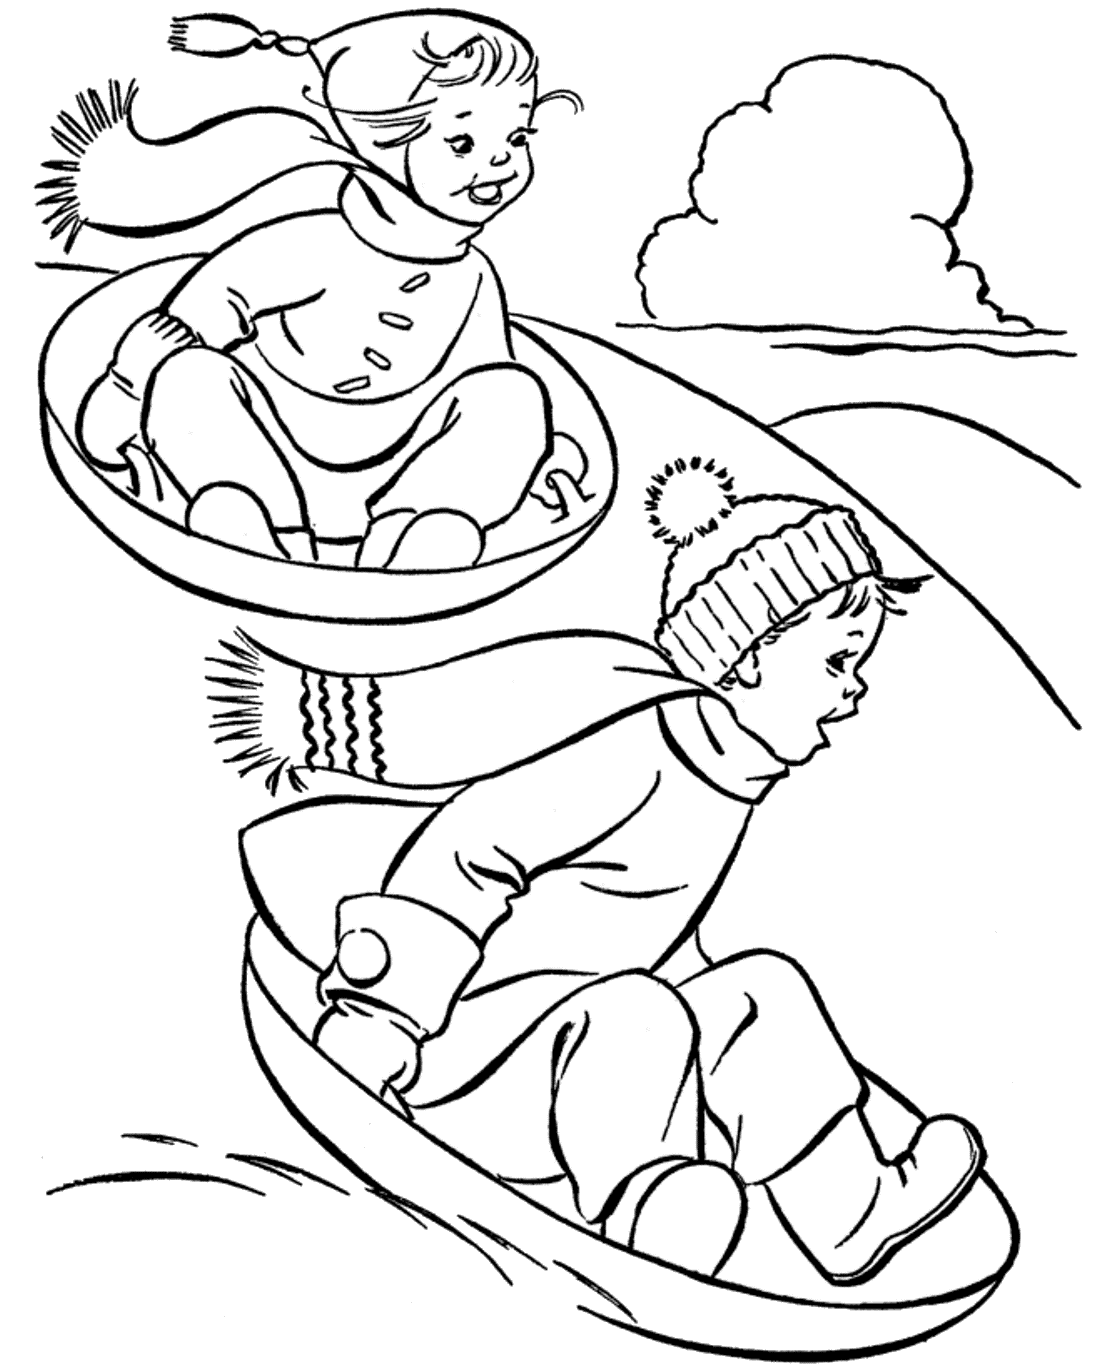 Sports Photograph Coloring Pages Kids: Winter Sports ...